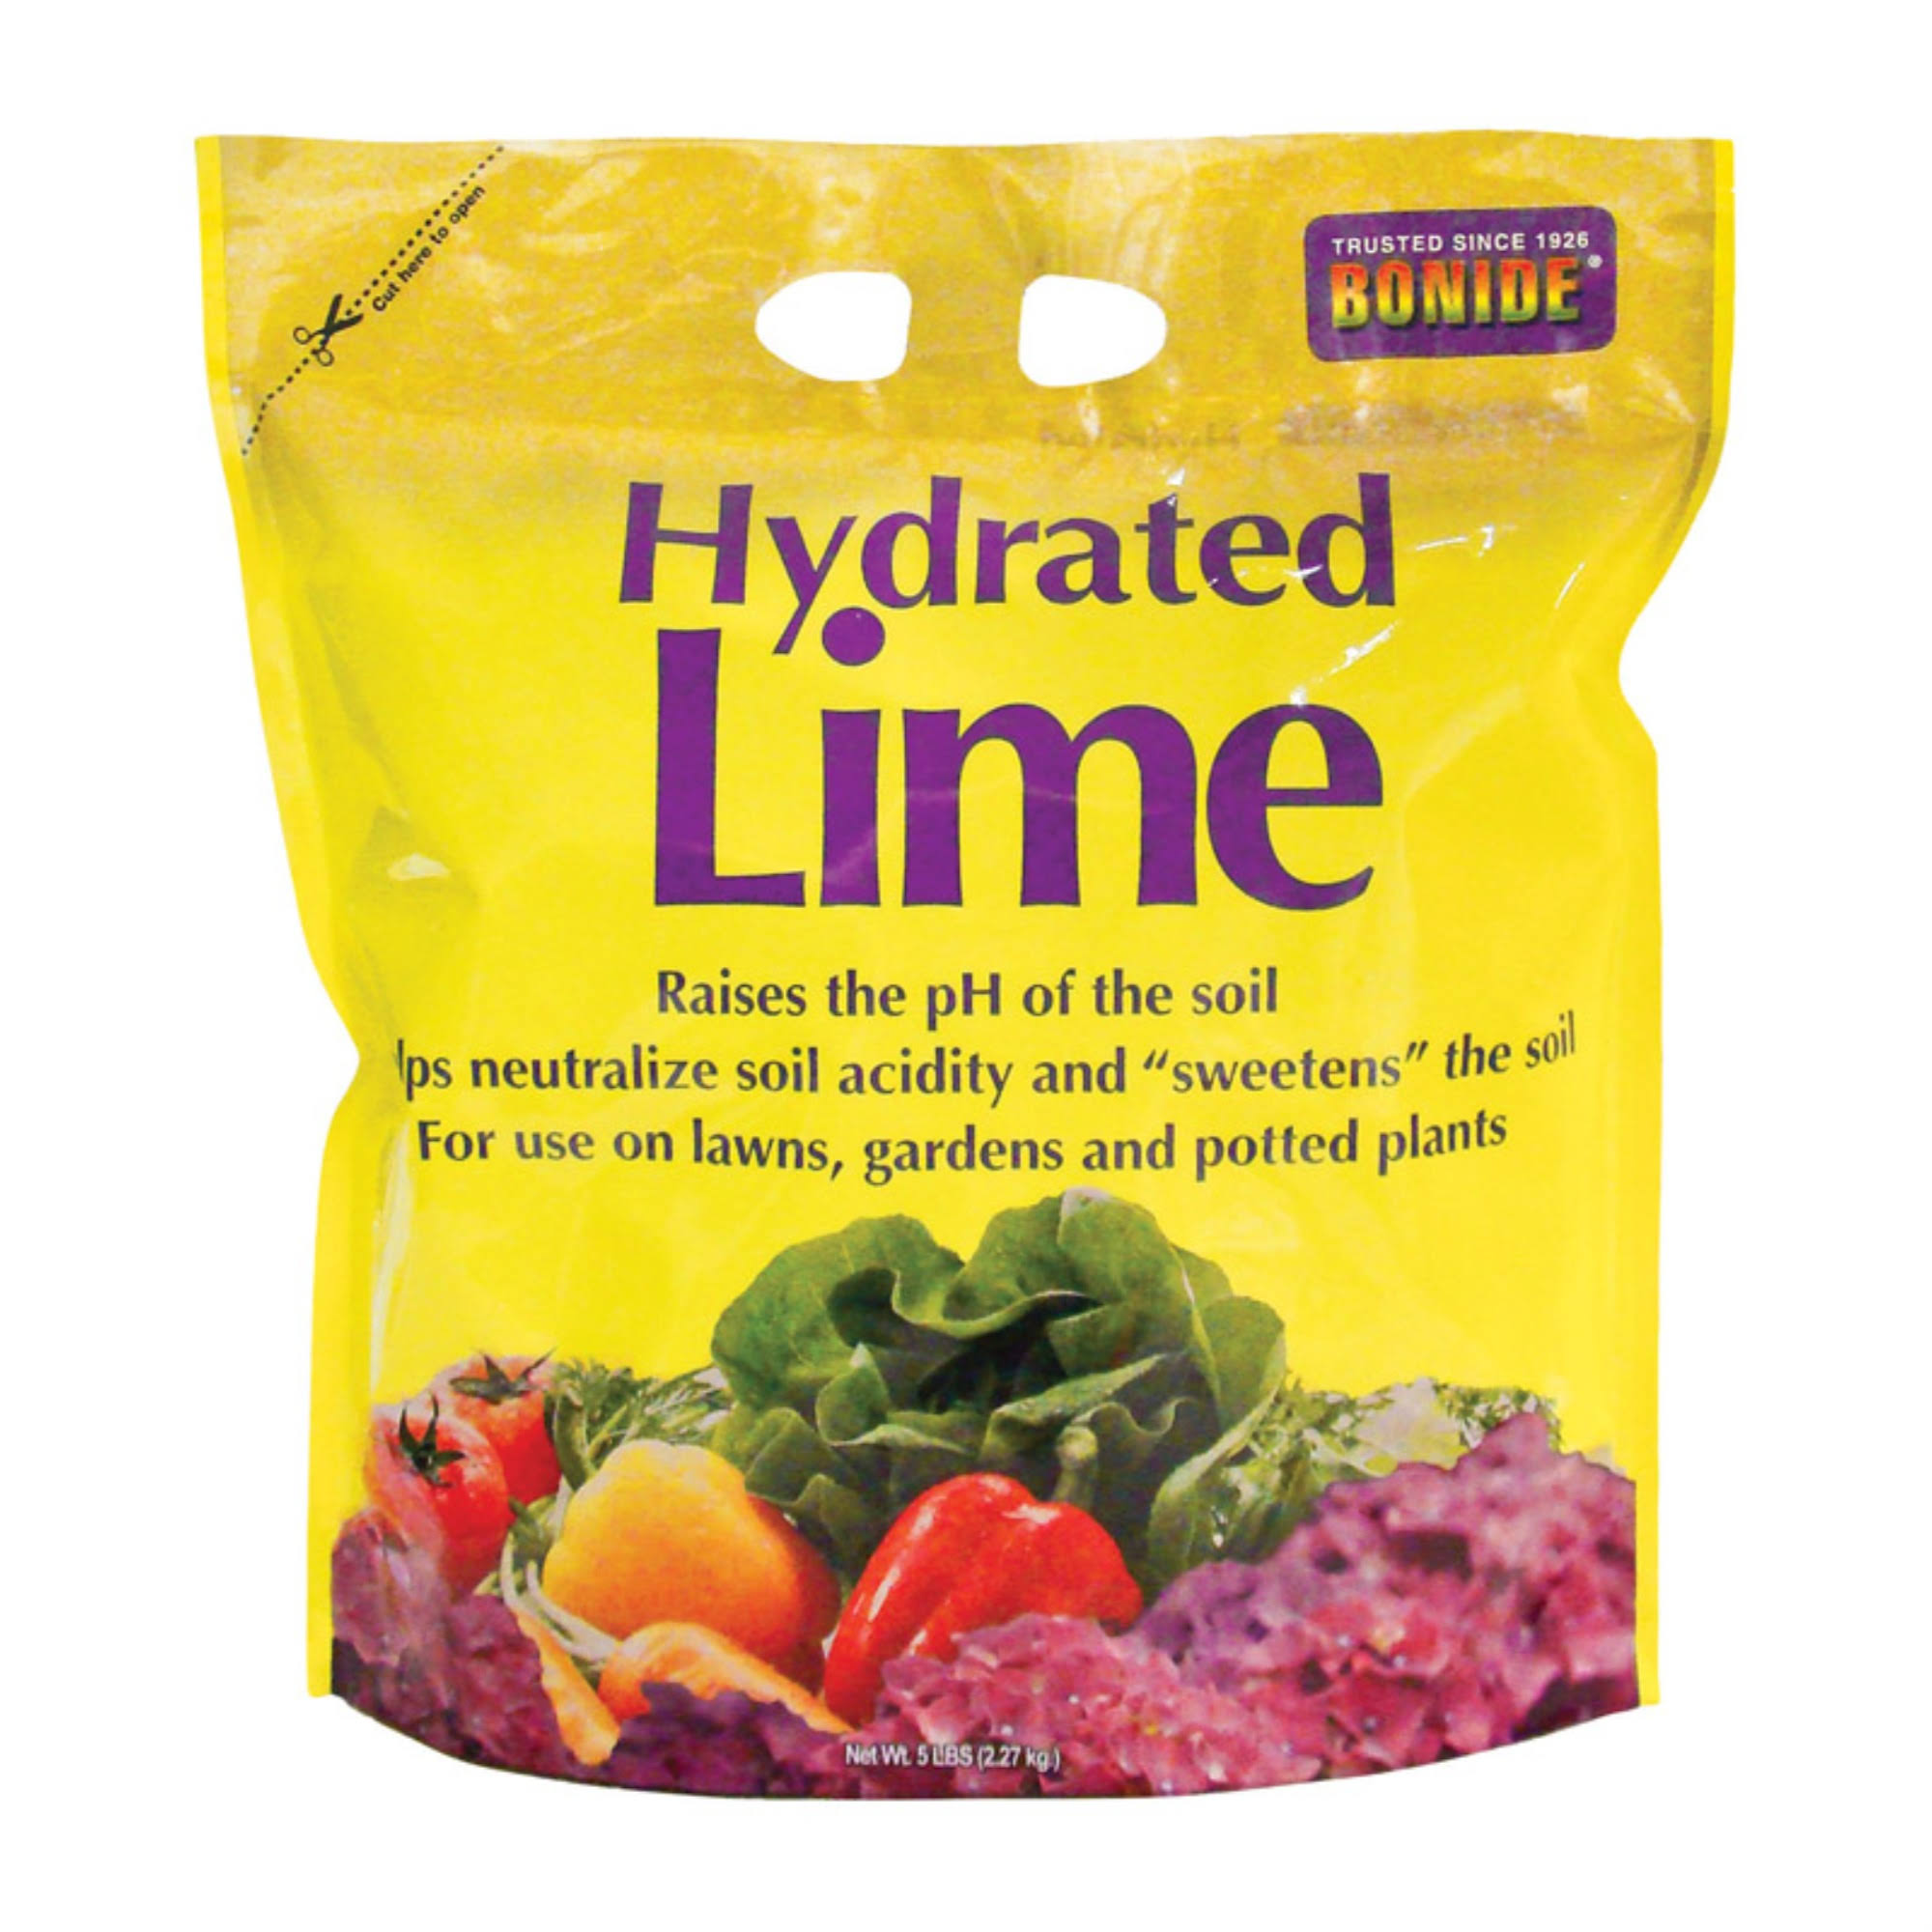 Bonide Chemical Number-5 Hydrated Lime for Soil